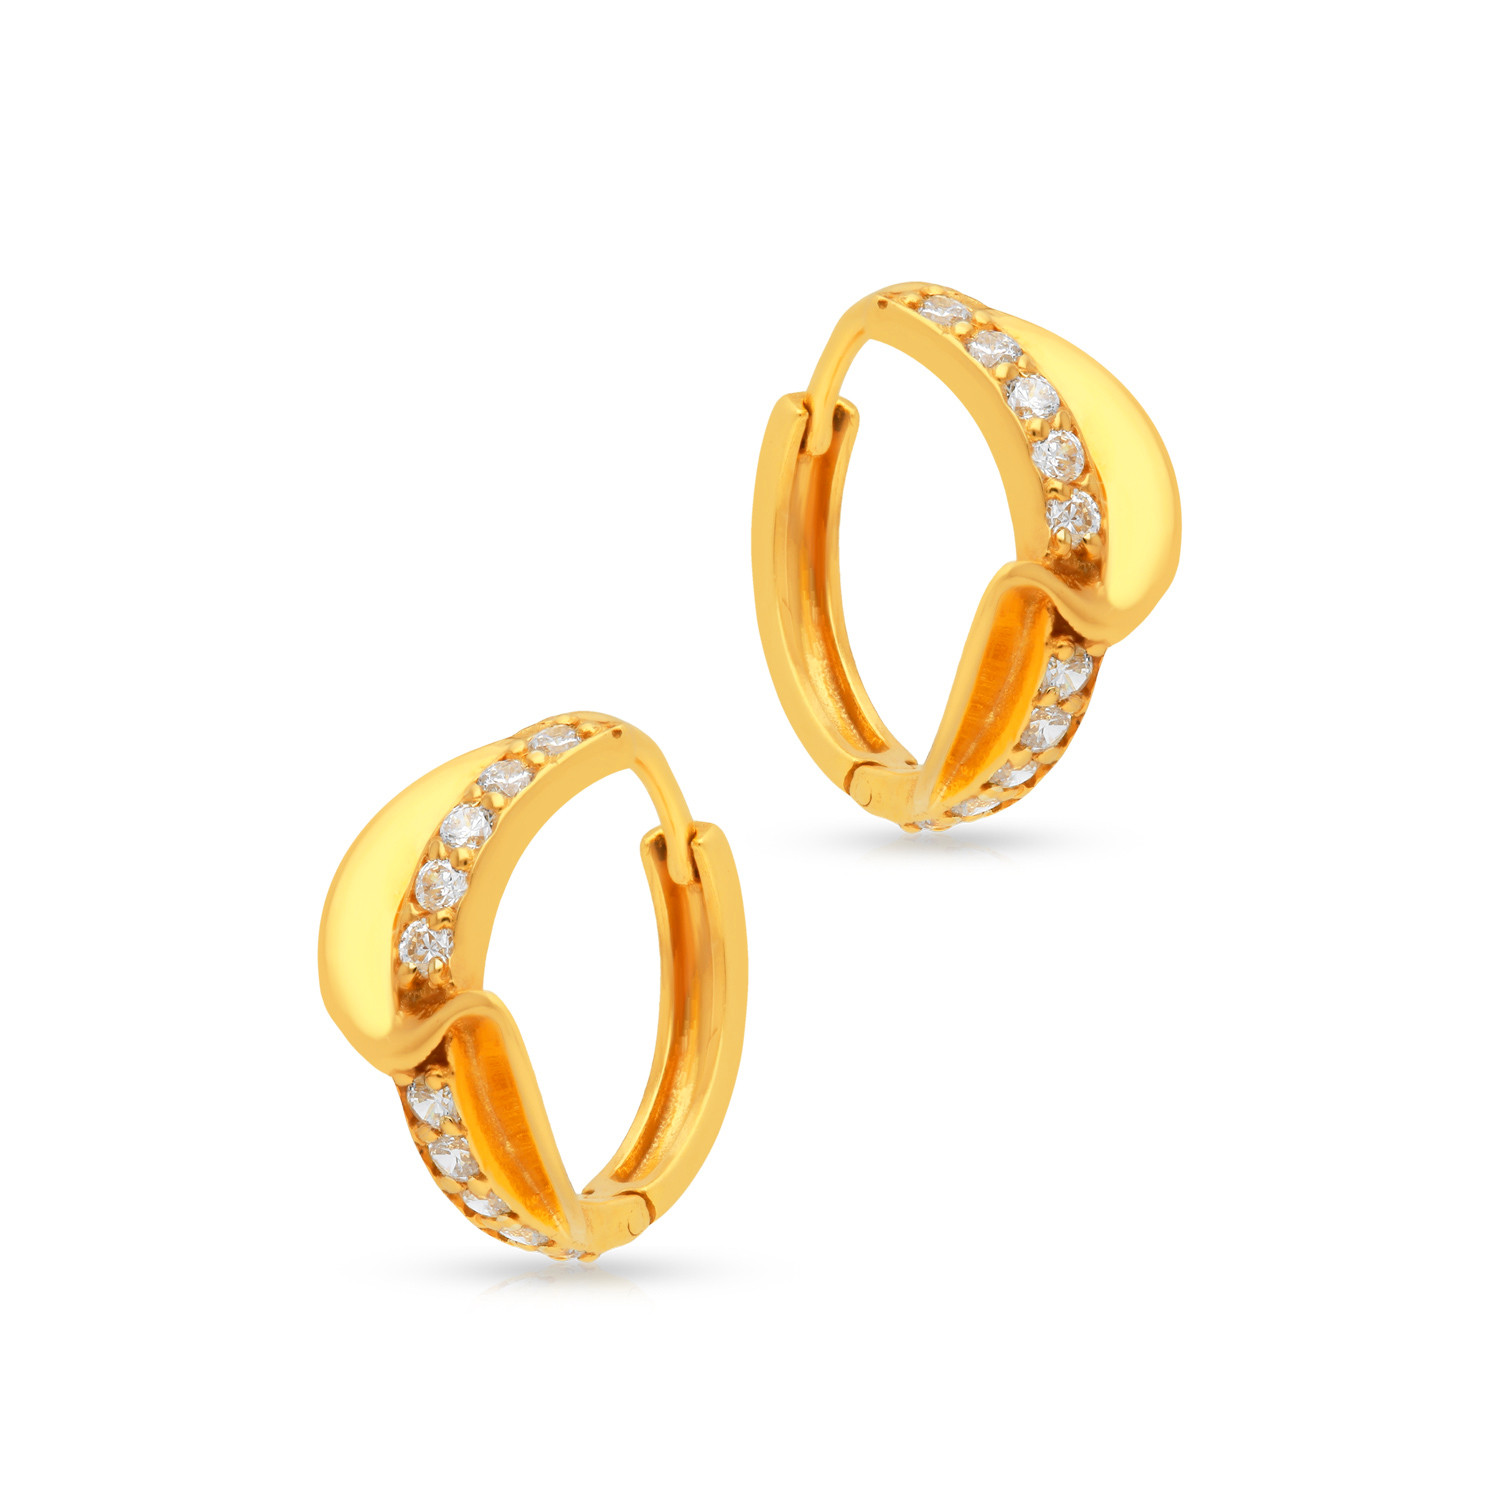 The rhythmic sway of these  Malabar Gold and Diamonds  Facebook